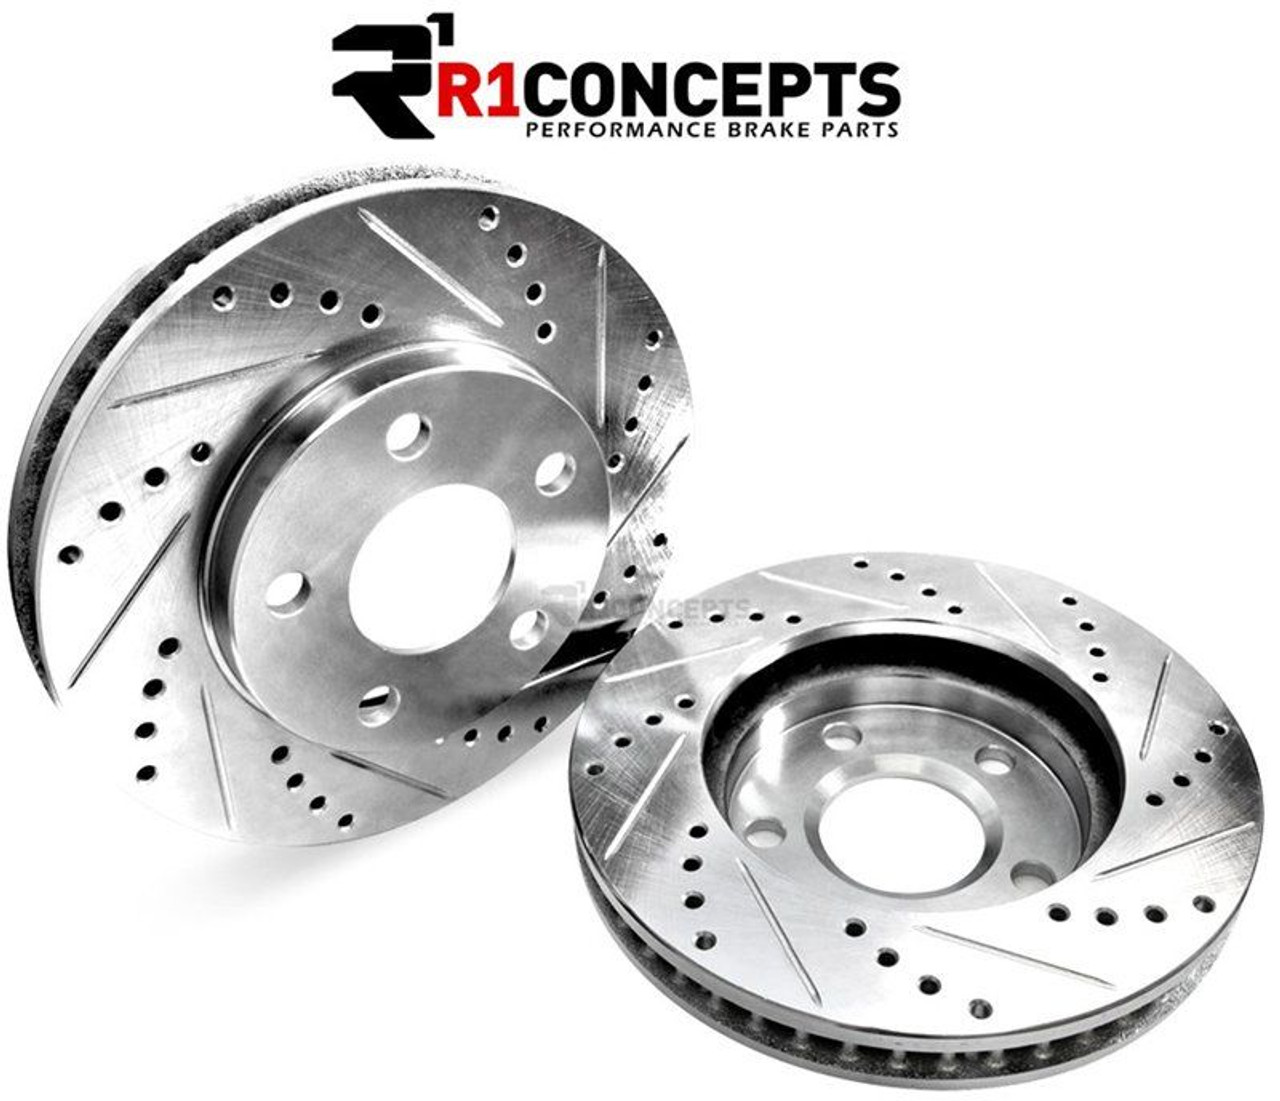 R1 Concepts E-Line Drilled/Slotted Front Brake Rotors For 2006-12